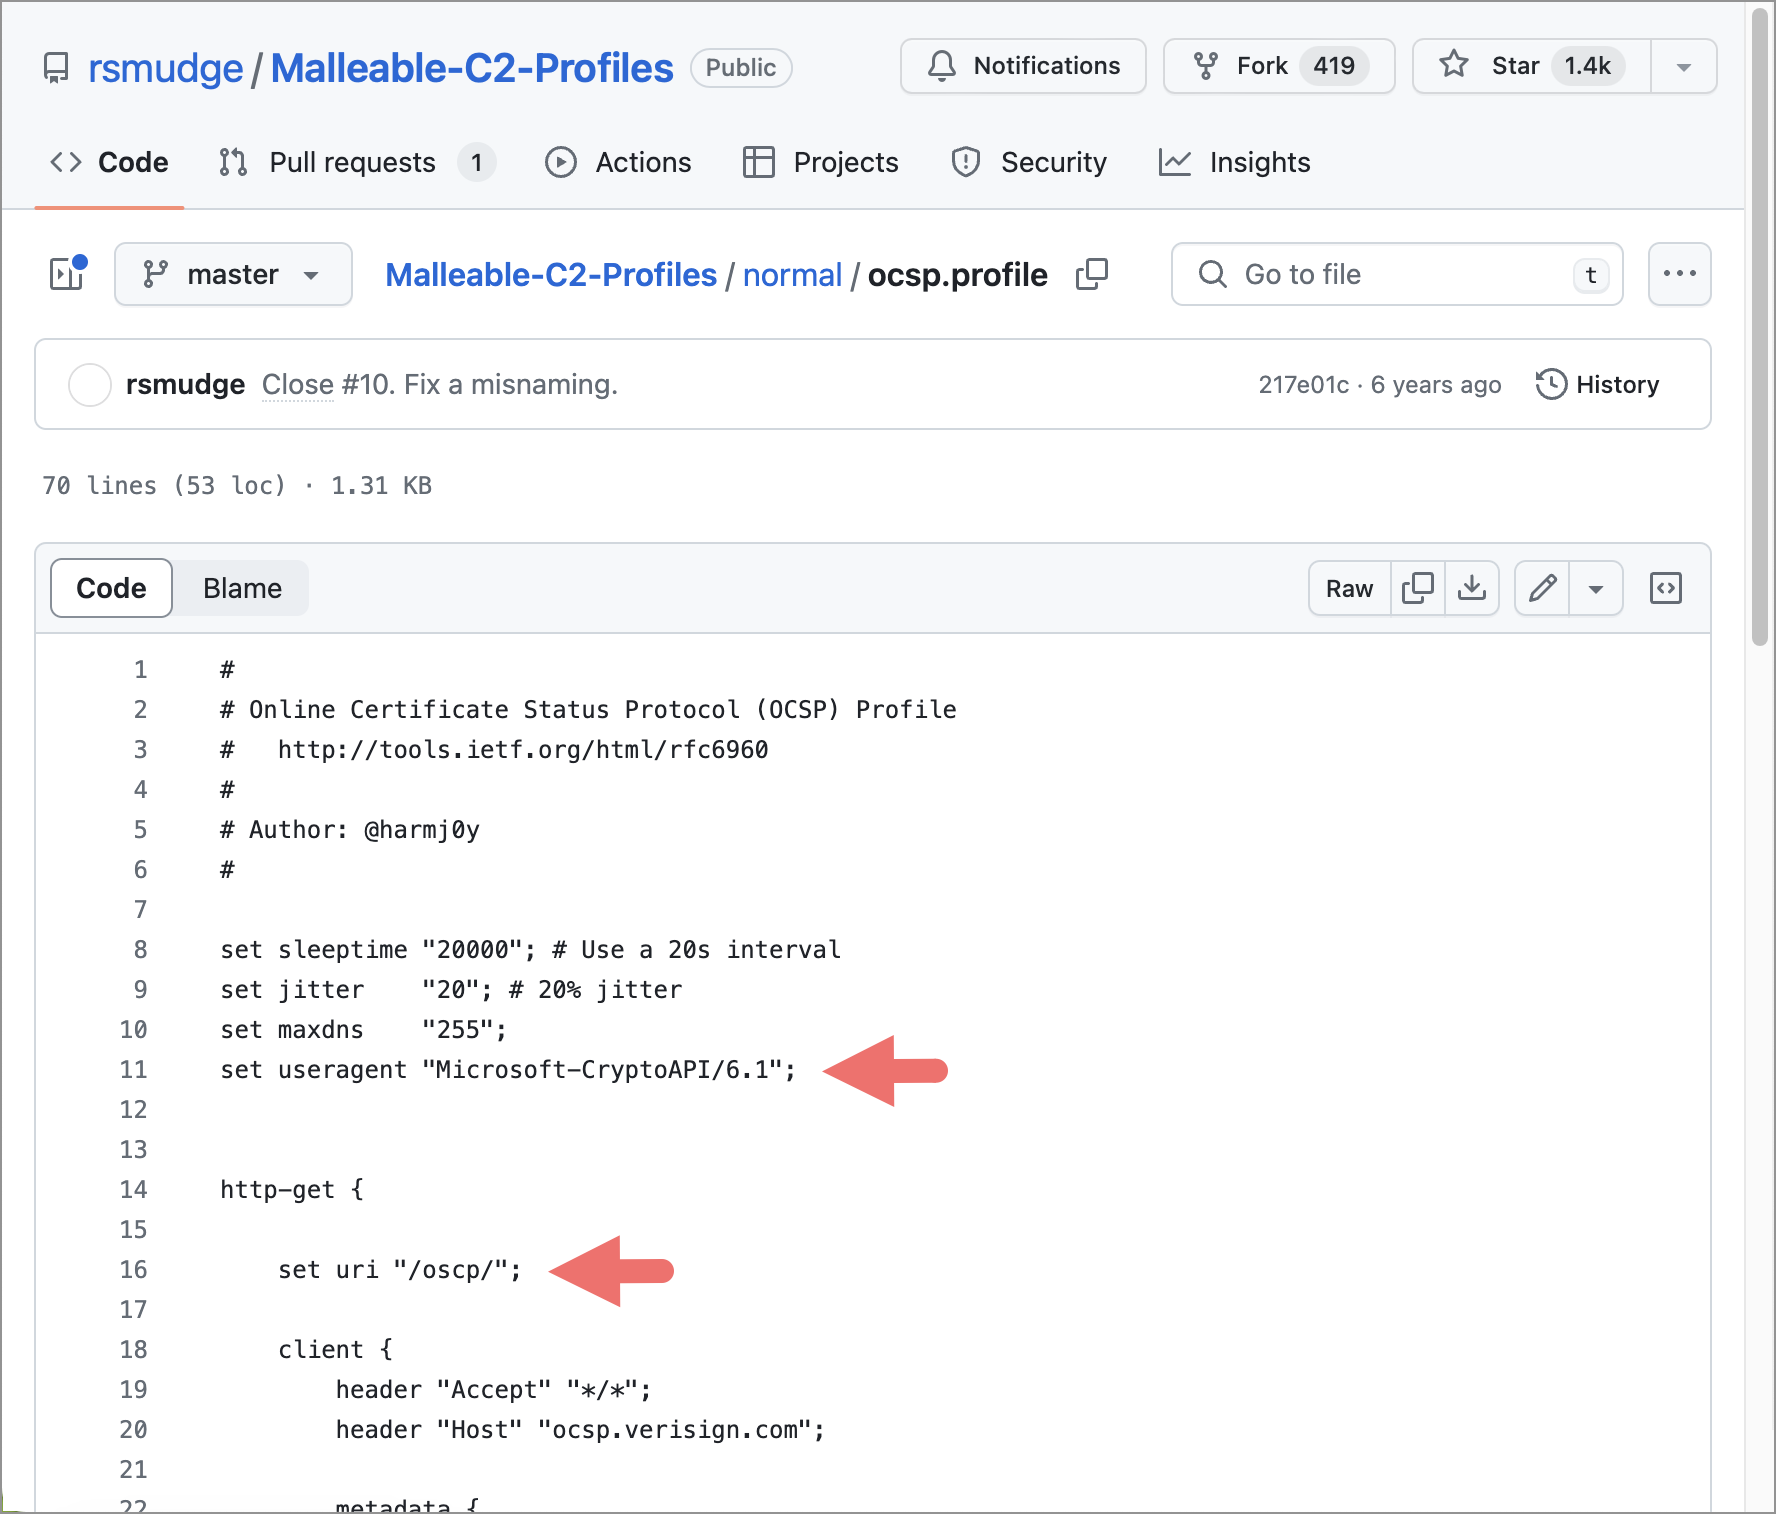 Image 3 is a screenshot of the GitHub page for user rsmudge’s Malleable C2 profile. 